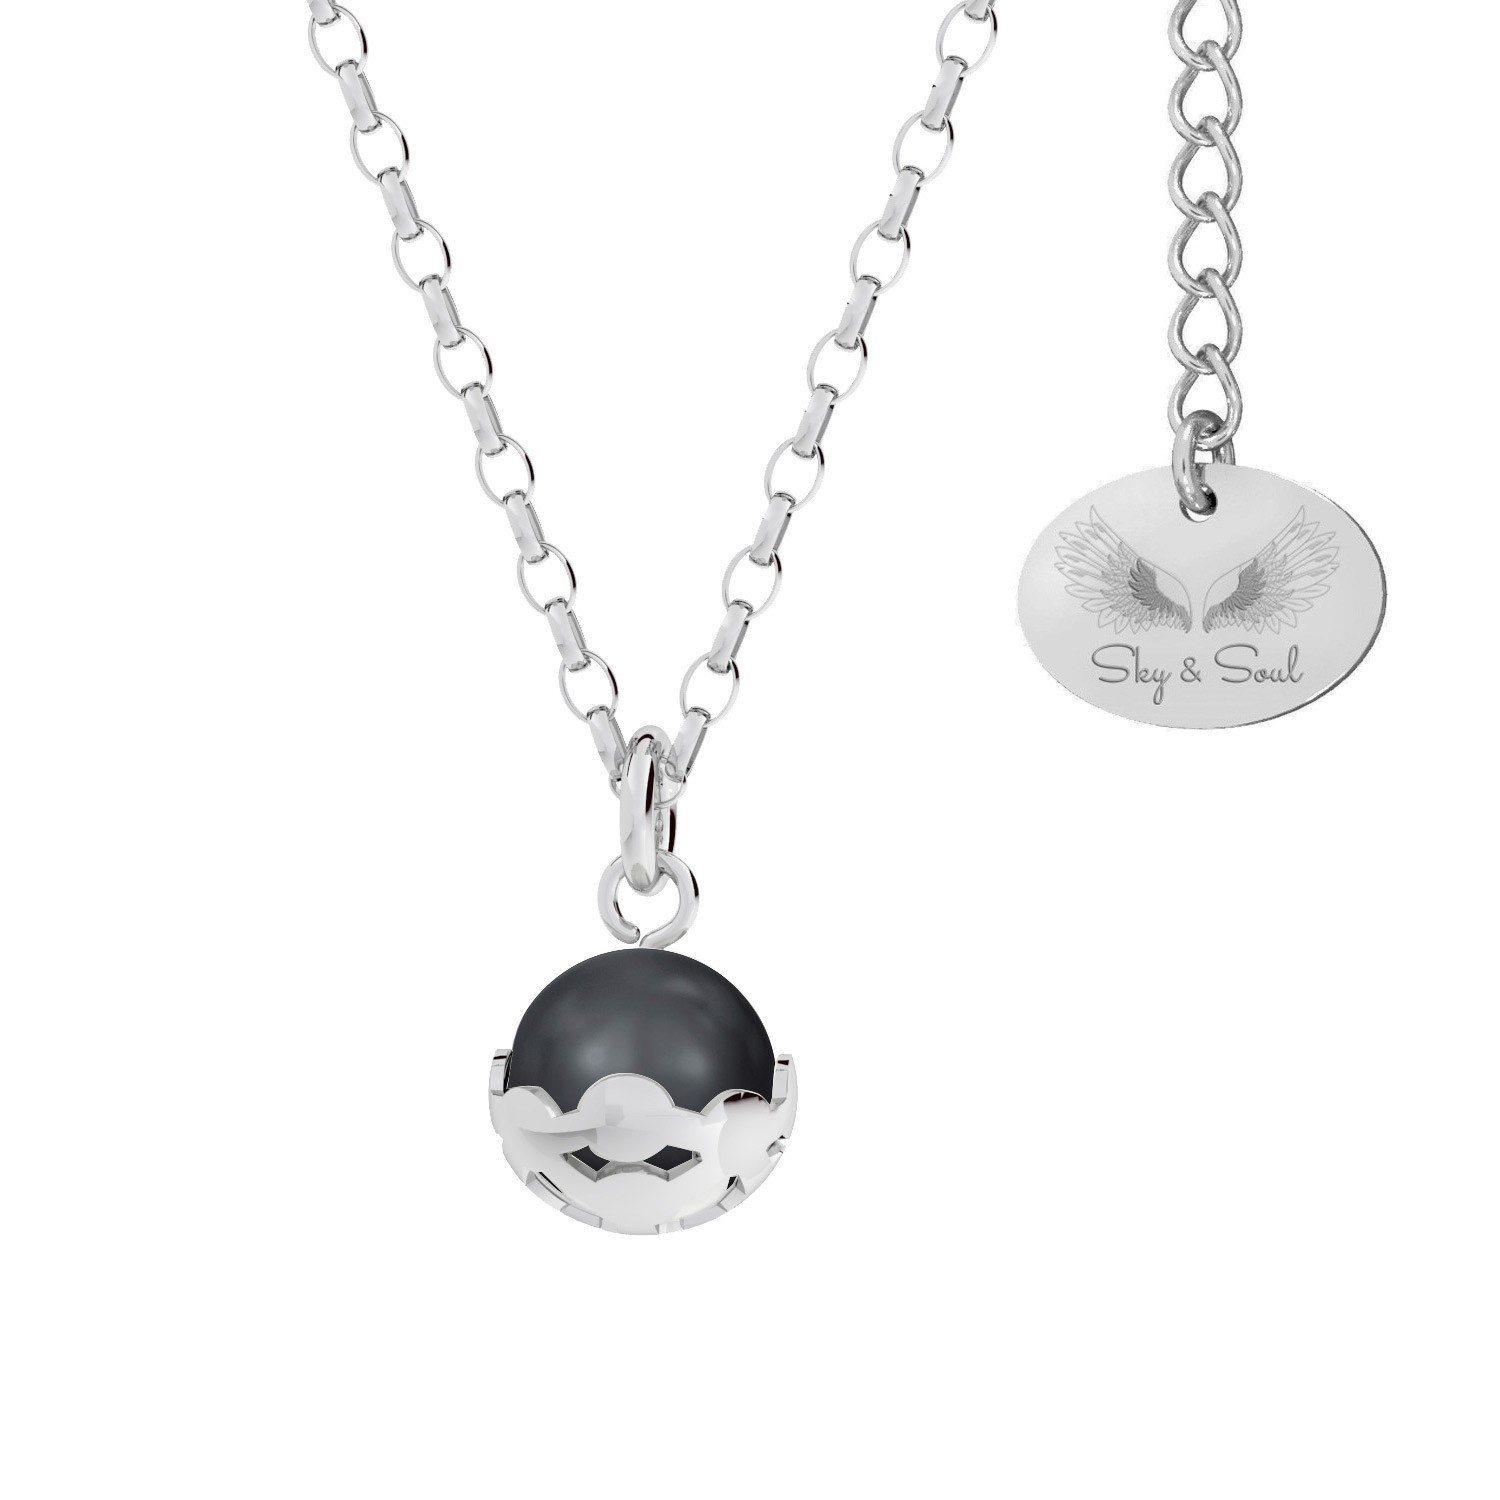 Necklace with pearl, Sky&Soul, sterling silver 925